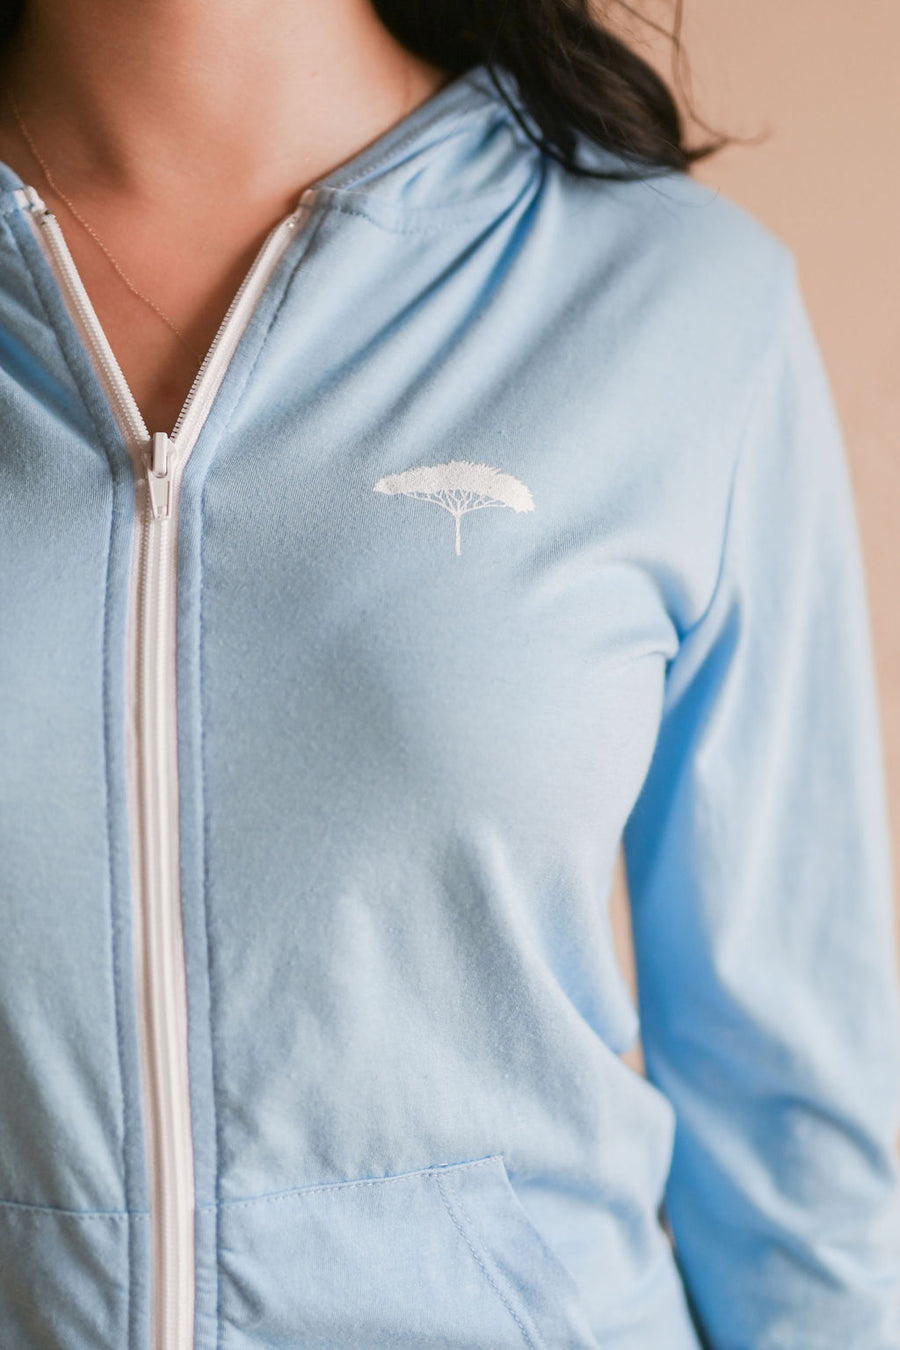 Organic unisex blue light weight zip up hoodie with white details